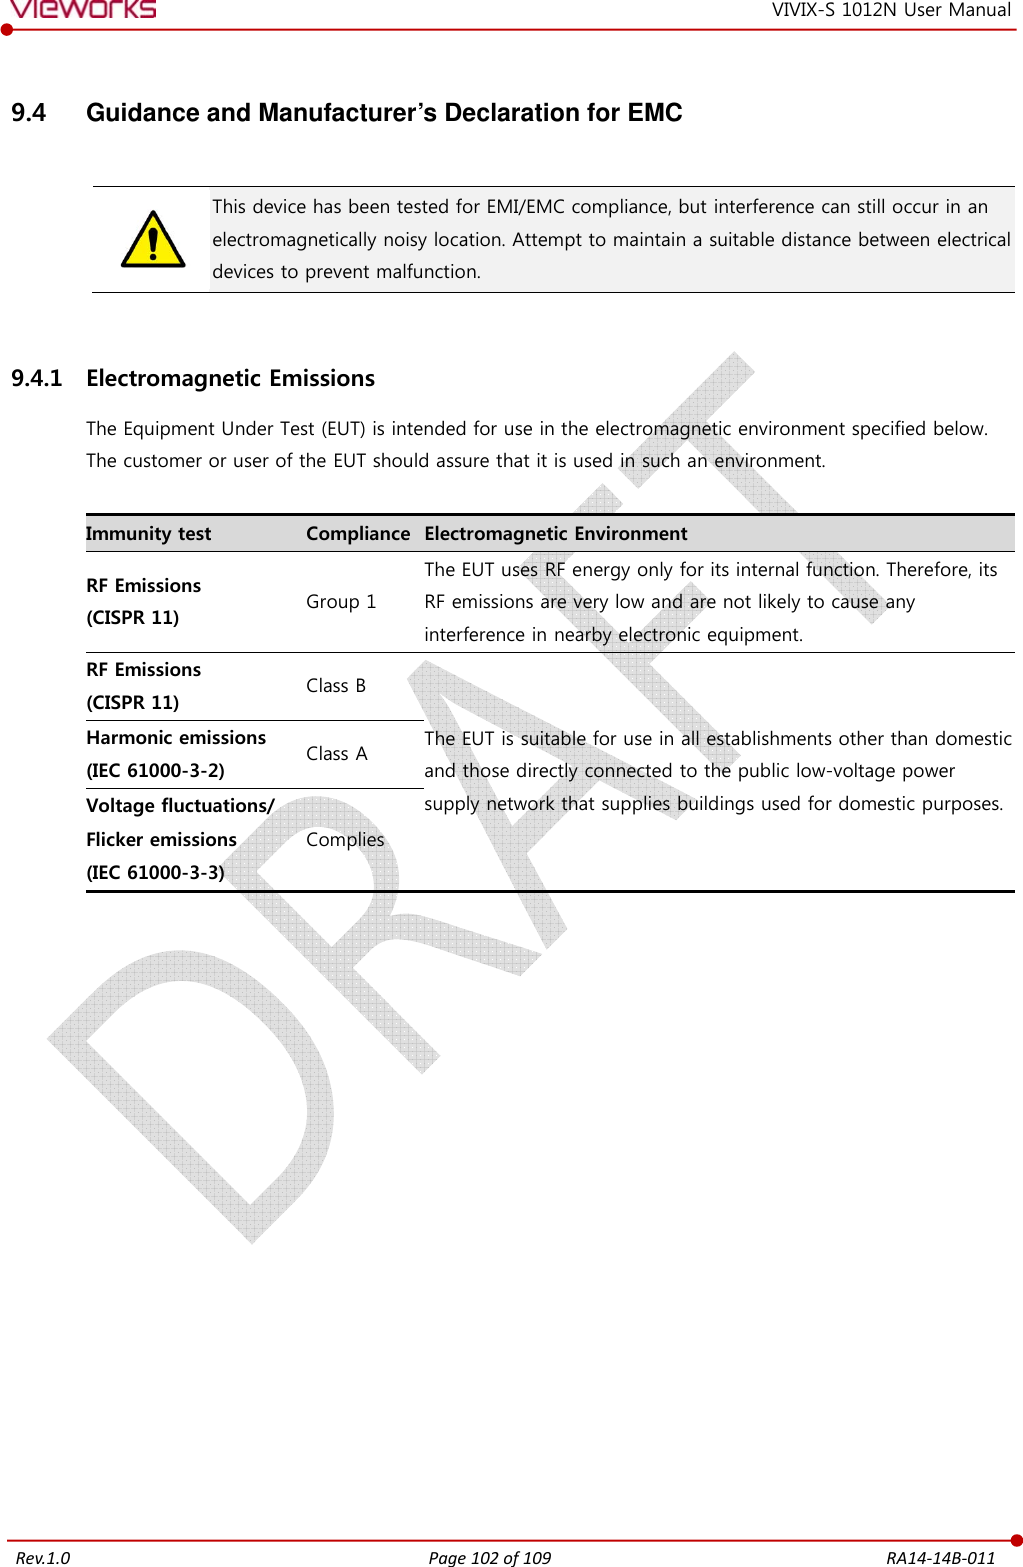   Rev.1.0 Page 102 of 109  RA14-14B-011 VIVIX-S 1012N User Manual 9.4  Guidance and Manufacturer’s Declaration for EMC   This device has been tested for EMI/EMC compliance, but interference can still occur in an electromagnetically noisy location. Attempt to maintain a suitable distance between electrical devices to prevent malfunction.  9.4.1 Electromagnetic Emissions The Equipment Under Test (EUT) is intended for use in the electromagnetic environment specified below. The customer or user of the EUT should assure that it is used in such an environment.  Immunity test  Compliance Electromagnetic Environment RF Emissions (CISPR 11)  Group 1 The EUT uses RF energy only for its internal function. Therefore, its RF emissions are very low and are not likely to cause any interference in nearby electronic equipment. RF Emissions (CISPR 11)  Class B The EUT is suitable for use in all establishments other than domestic and those directly connected to the public low-voltage power supply network that supplies buildings used for domestic purposes. Harmonic emissions (IEC 61000-3-2)  Class A Voltage fluctuations/ Flicker emissions (IEC 61000-3-3) Complies                   